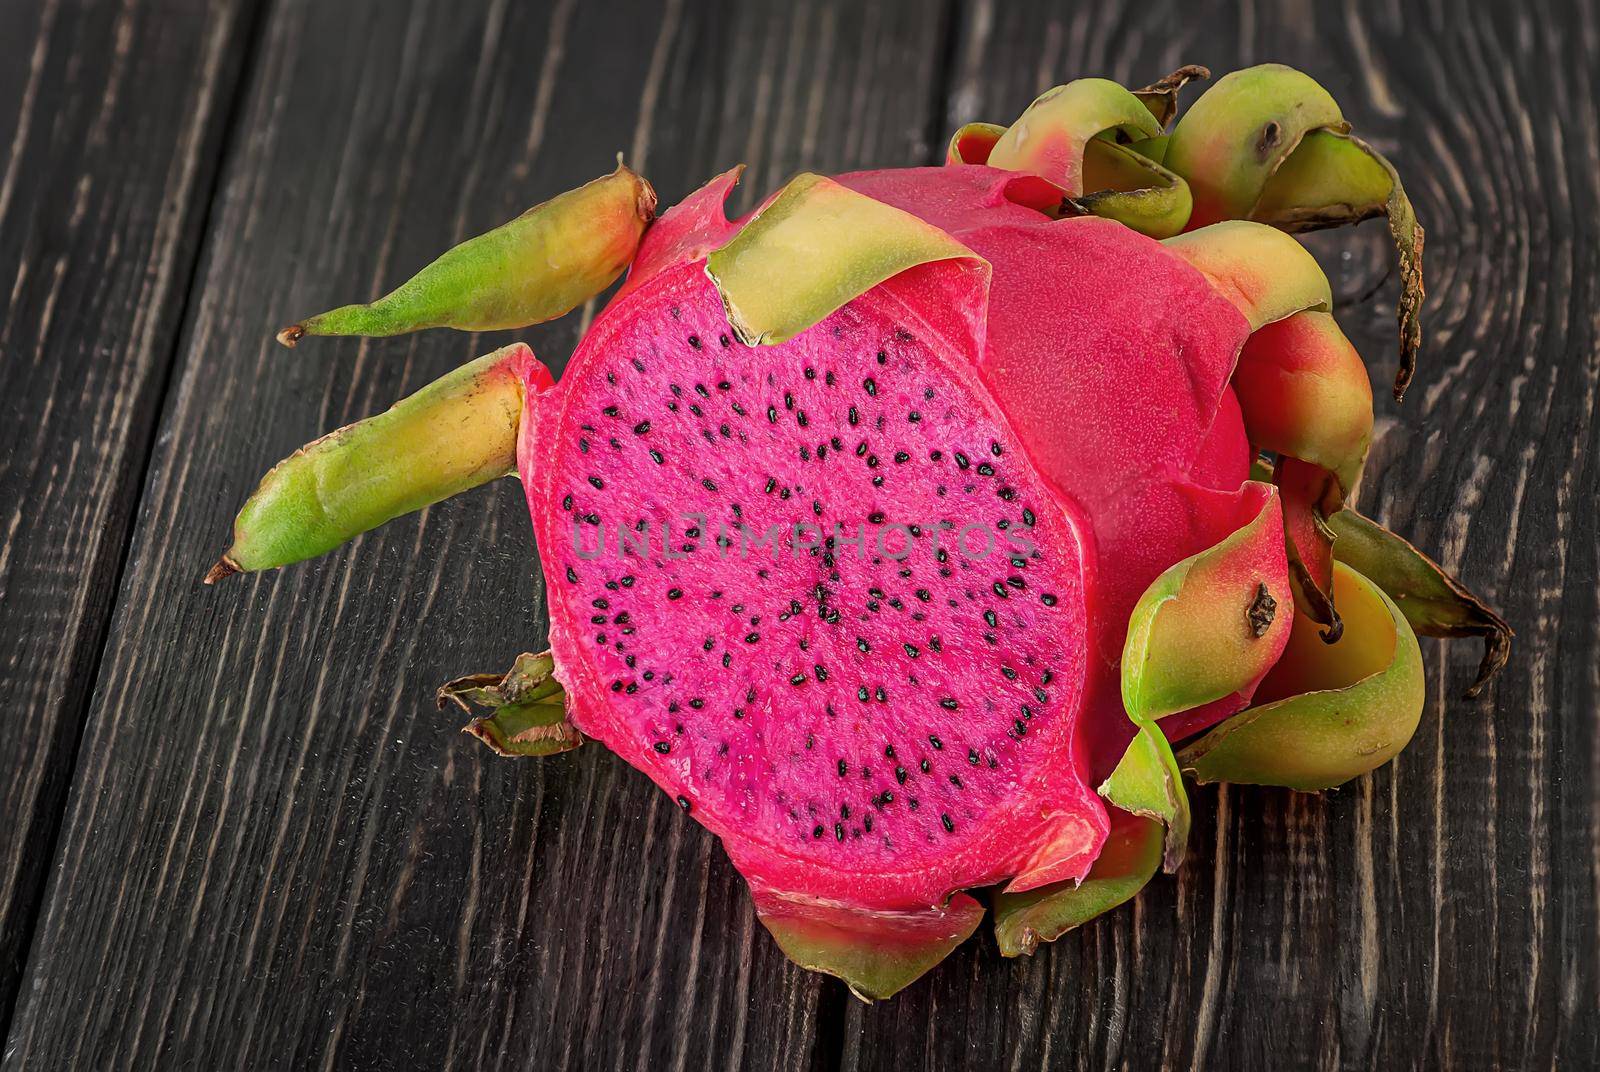 Half dragon fruit on a wooden planks by Cipariss